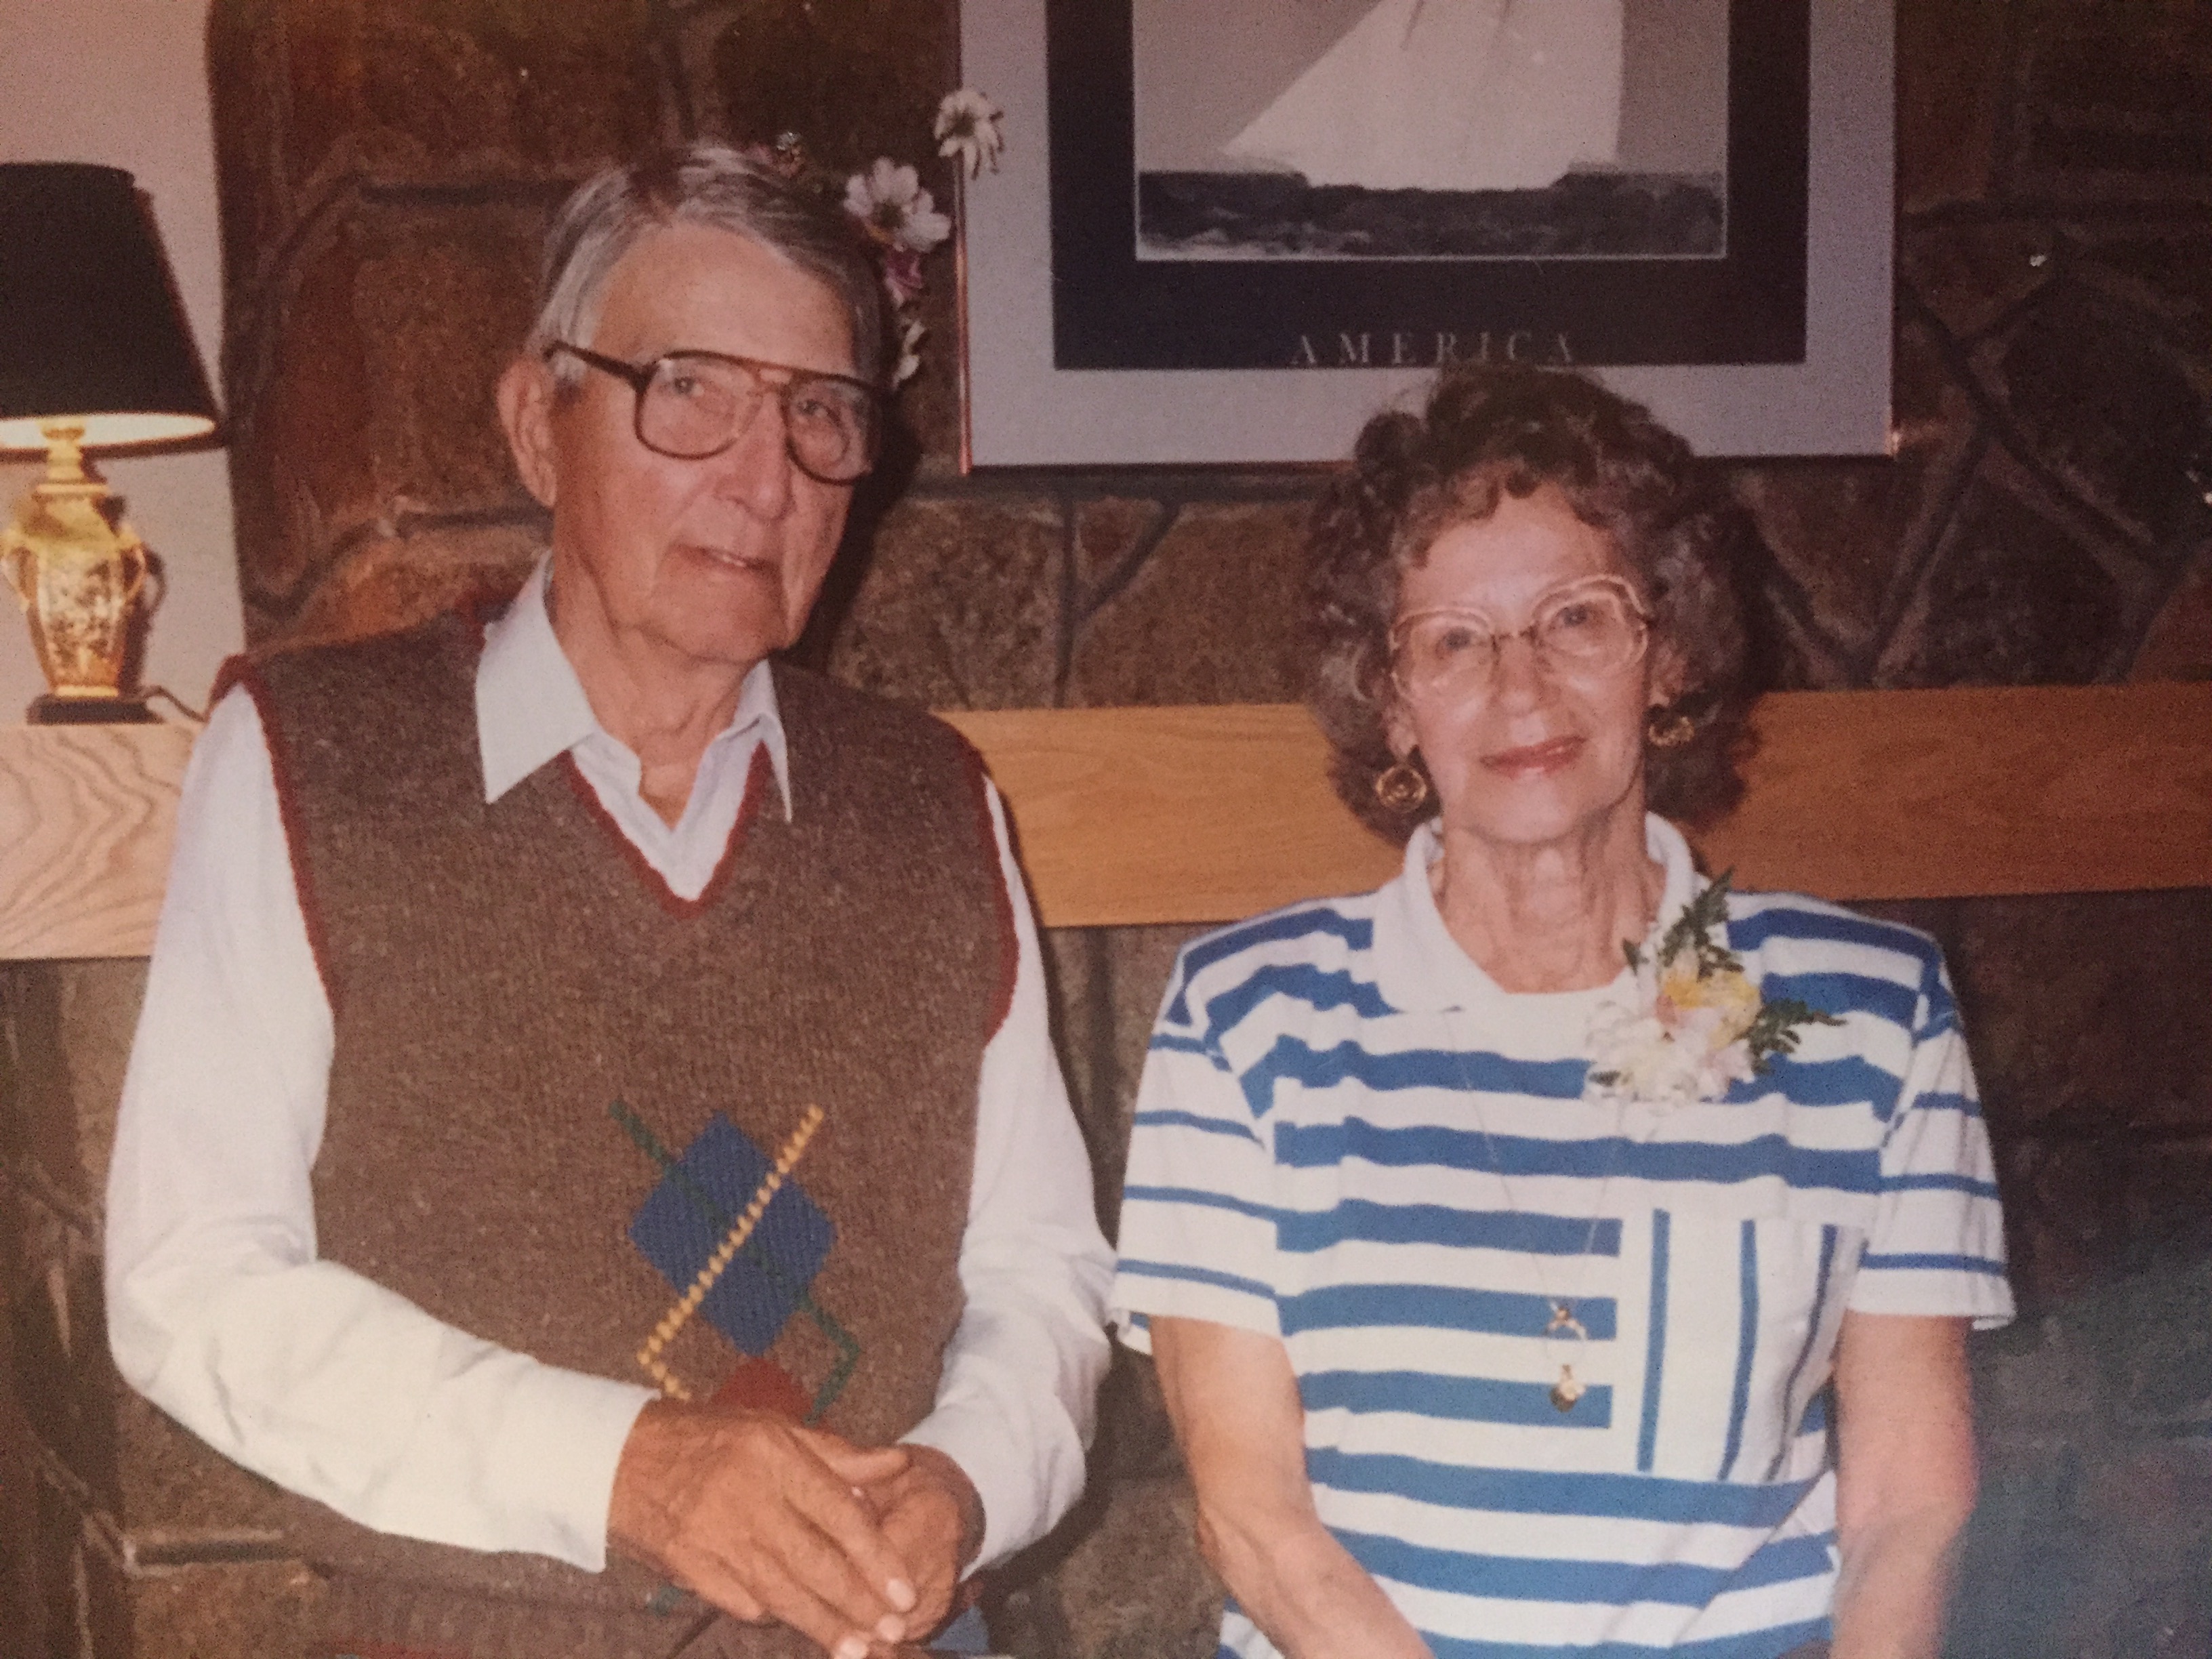 My grandparents, Ernest and Hilda Hanson, possibly in 1988. Photo courtesy of the Hanson family.